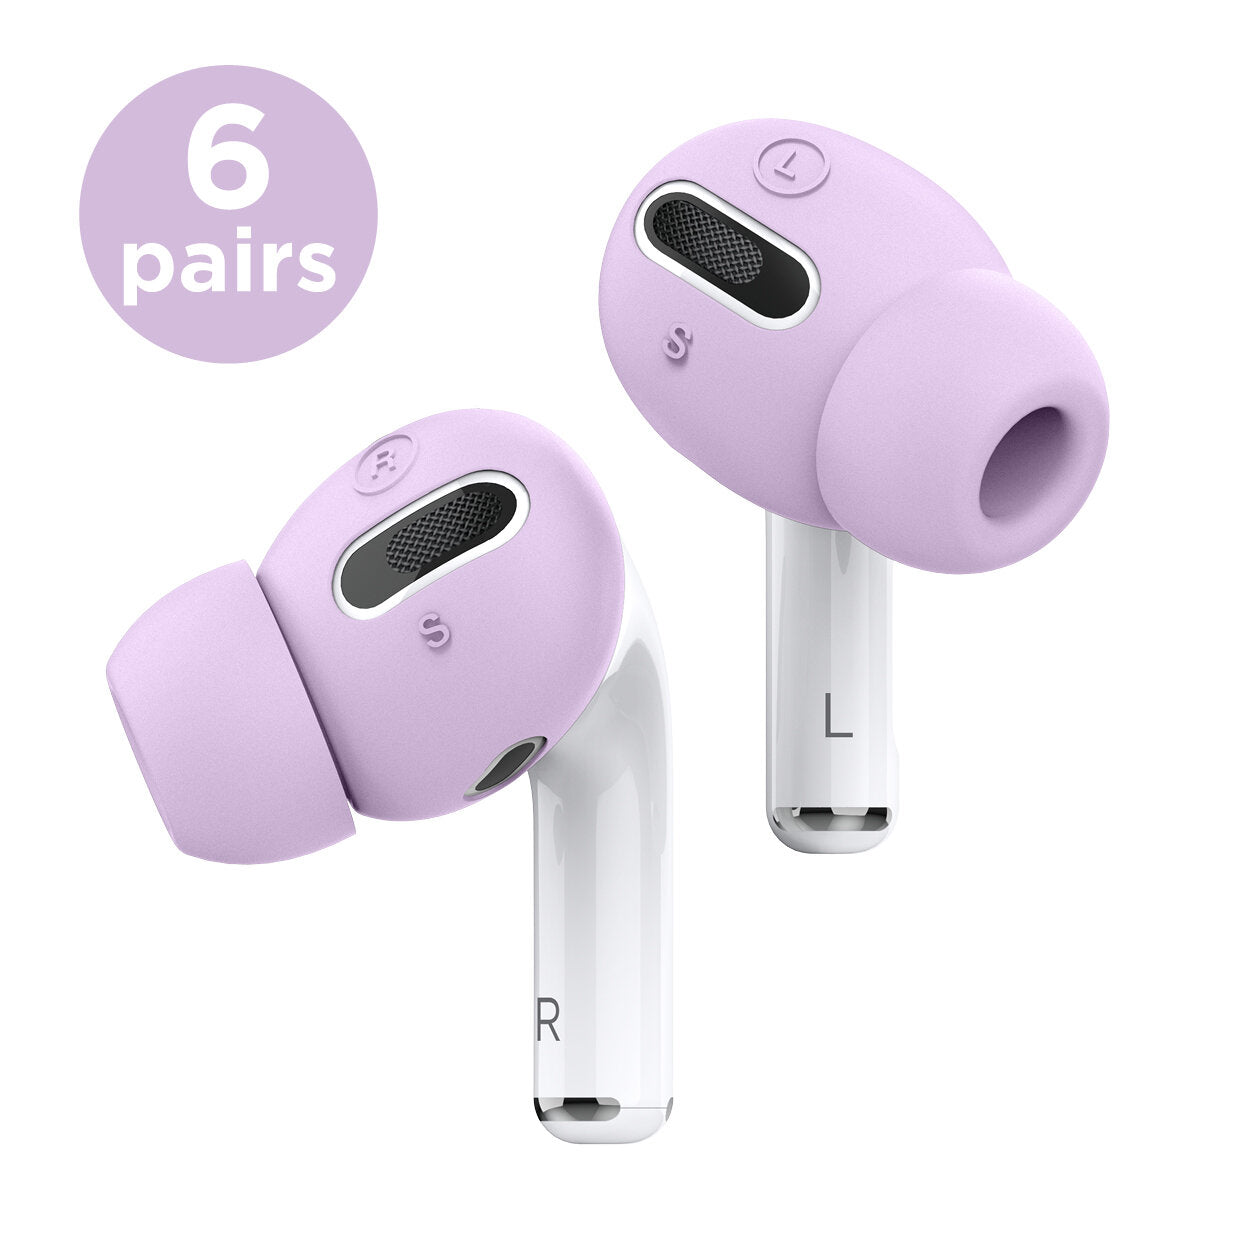 Earbuds Cover Plus with Integrated Tips for AirPods Pro (6 Pairs)